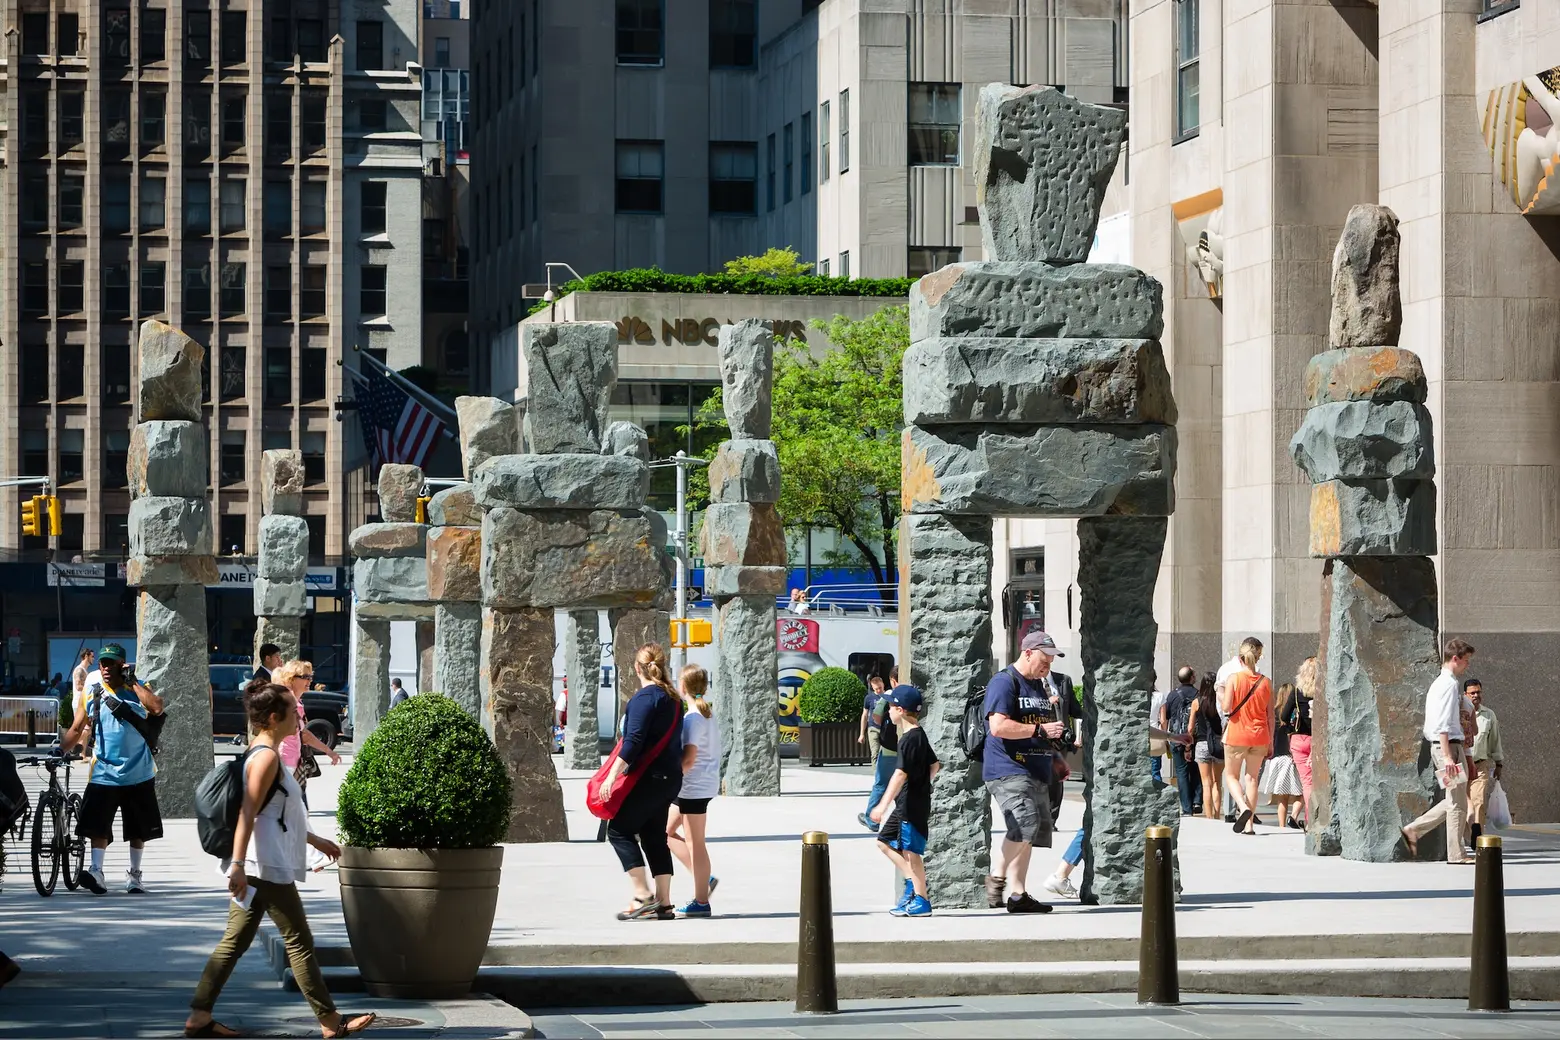 Looking back at 50 years of public art in NYC